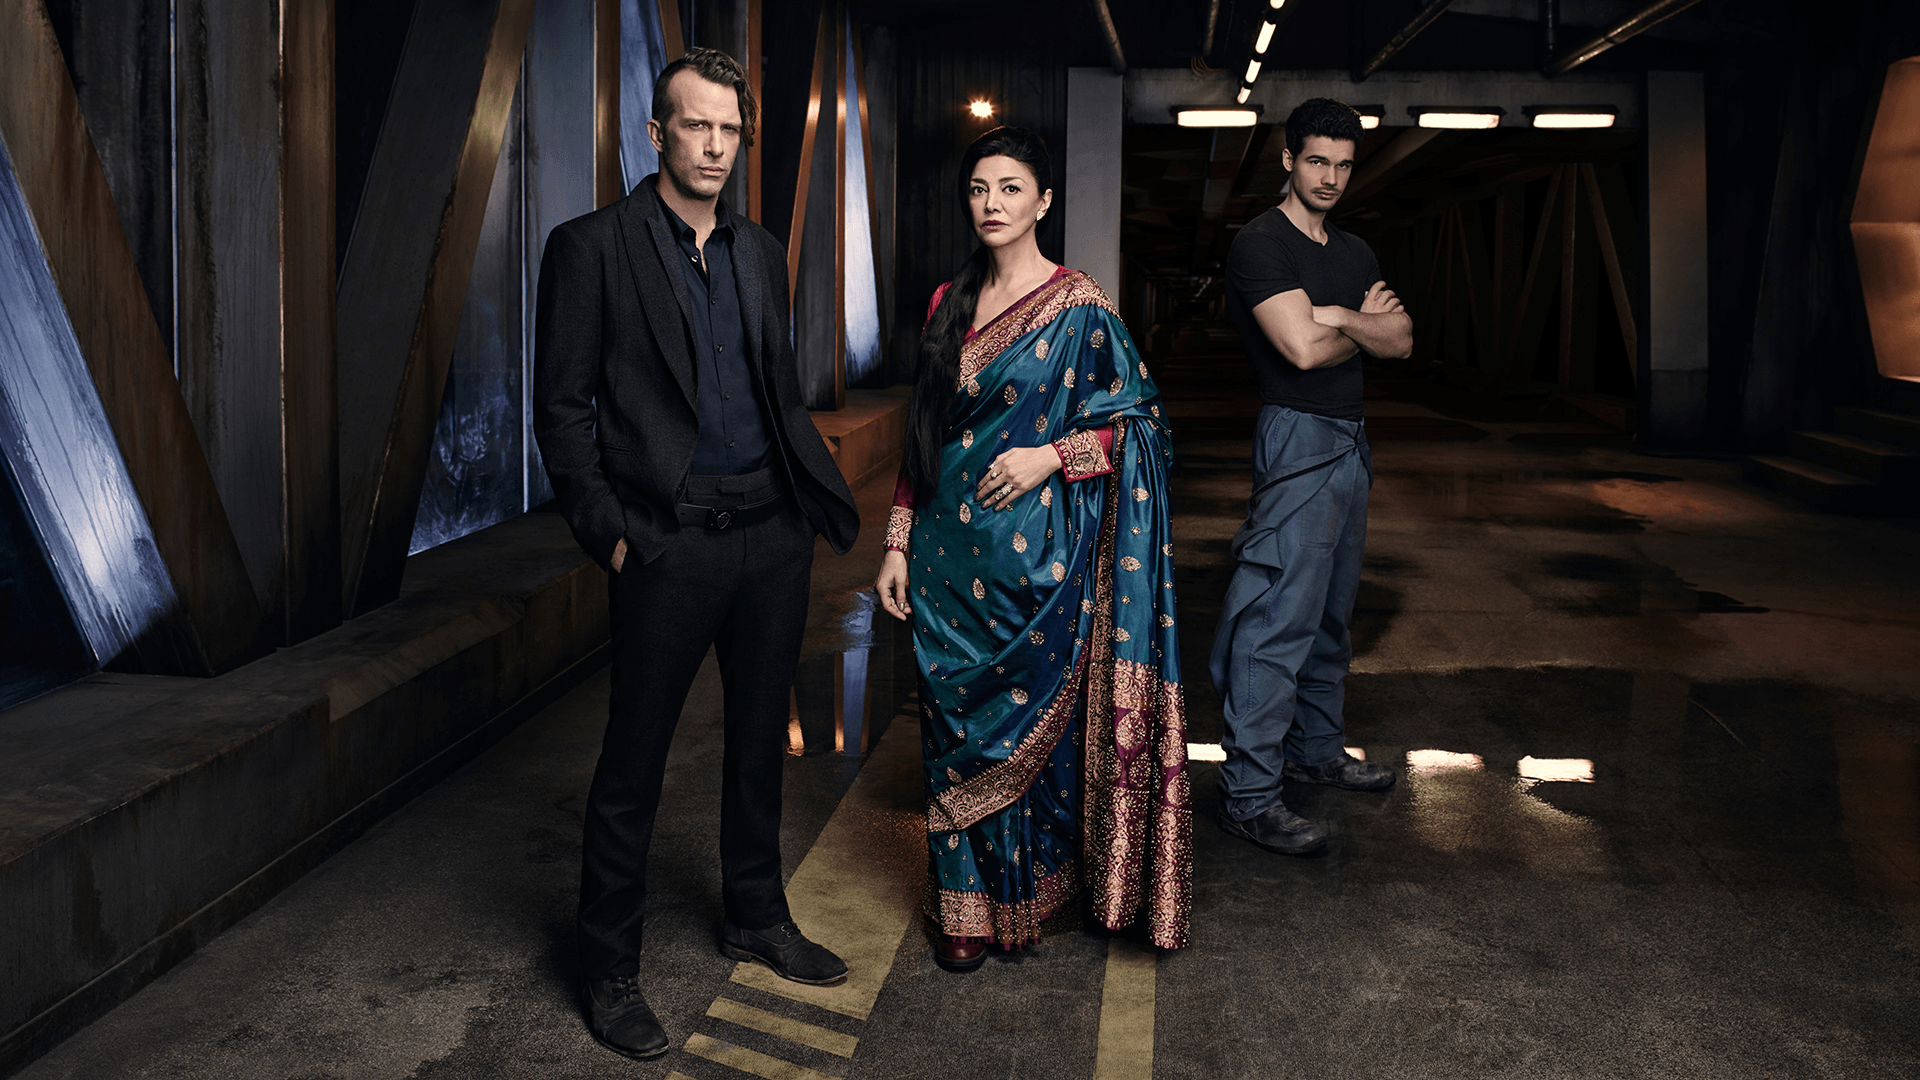 The Expanse Indian Lady, HD Tv Shows, 4k Wallpaper, Image